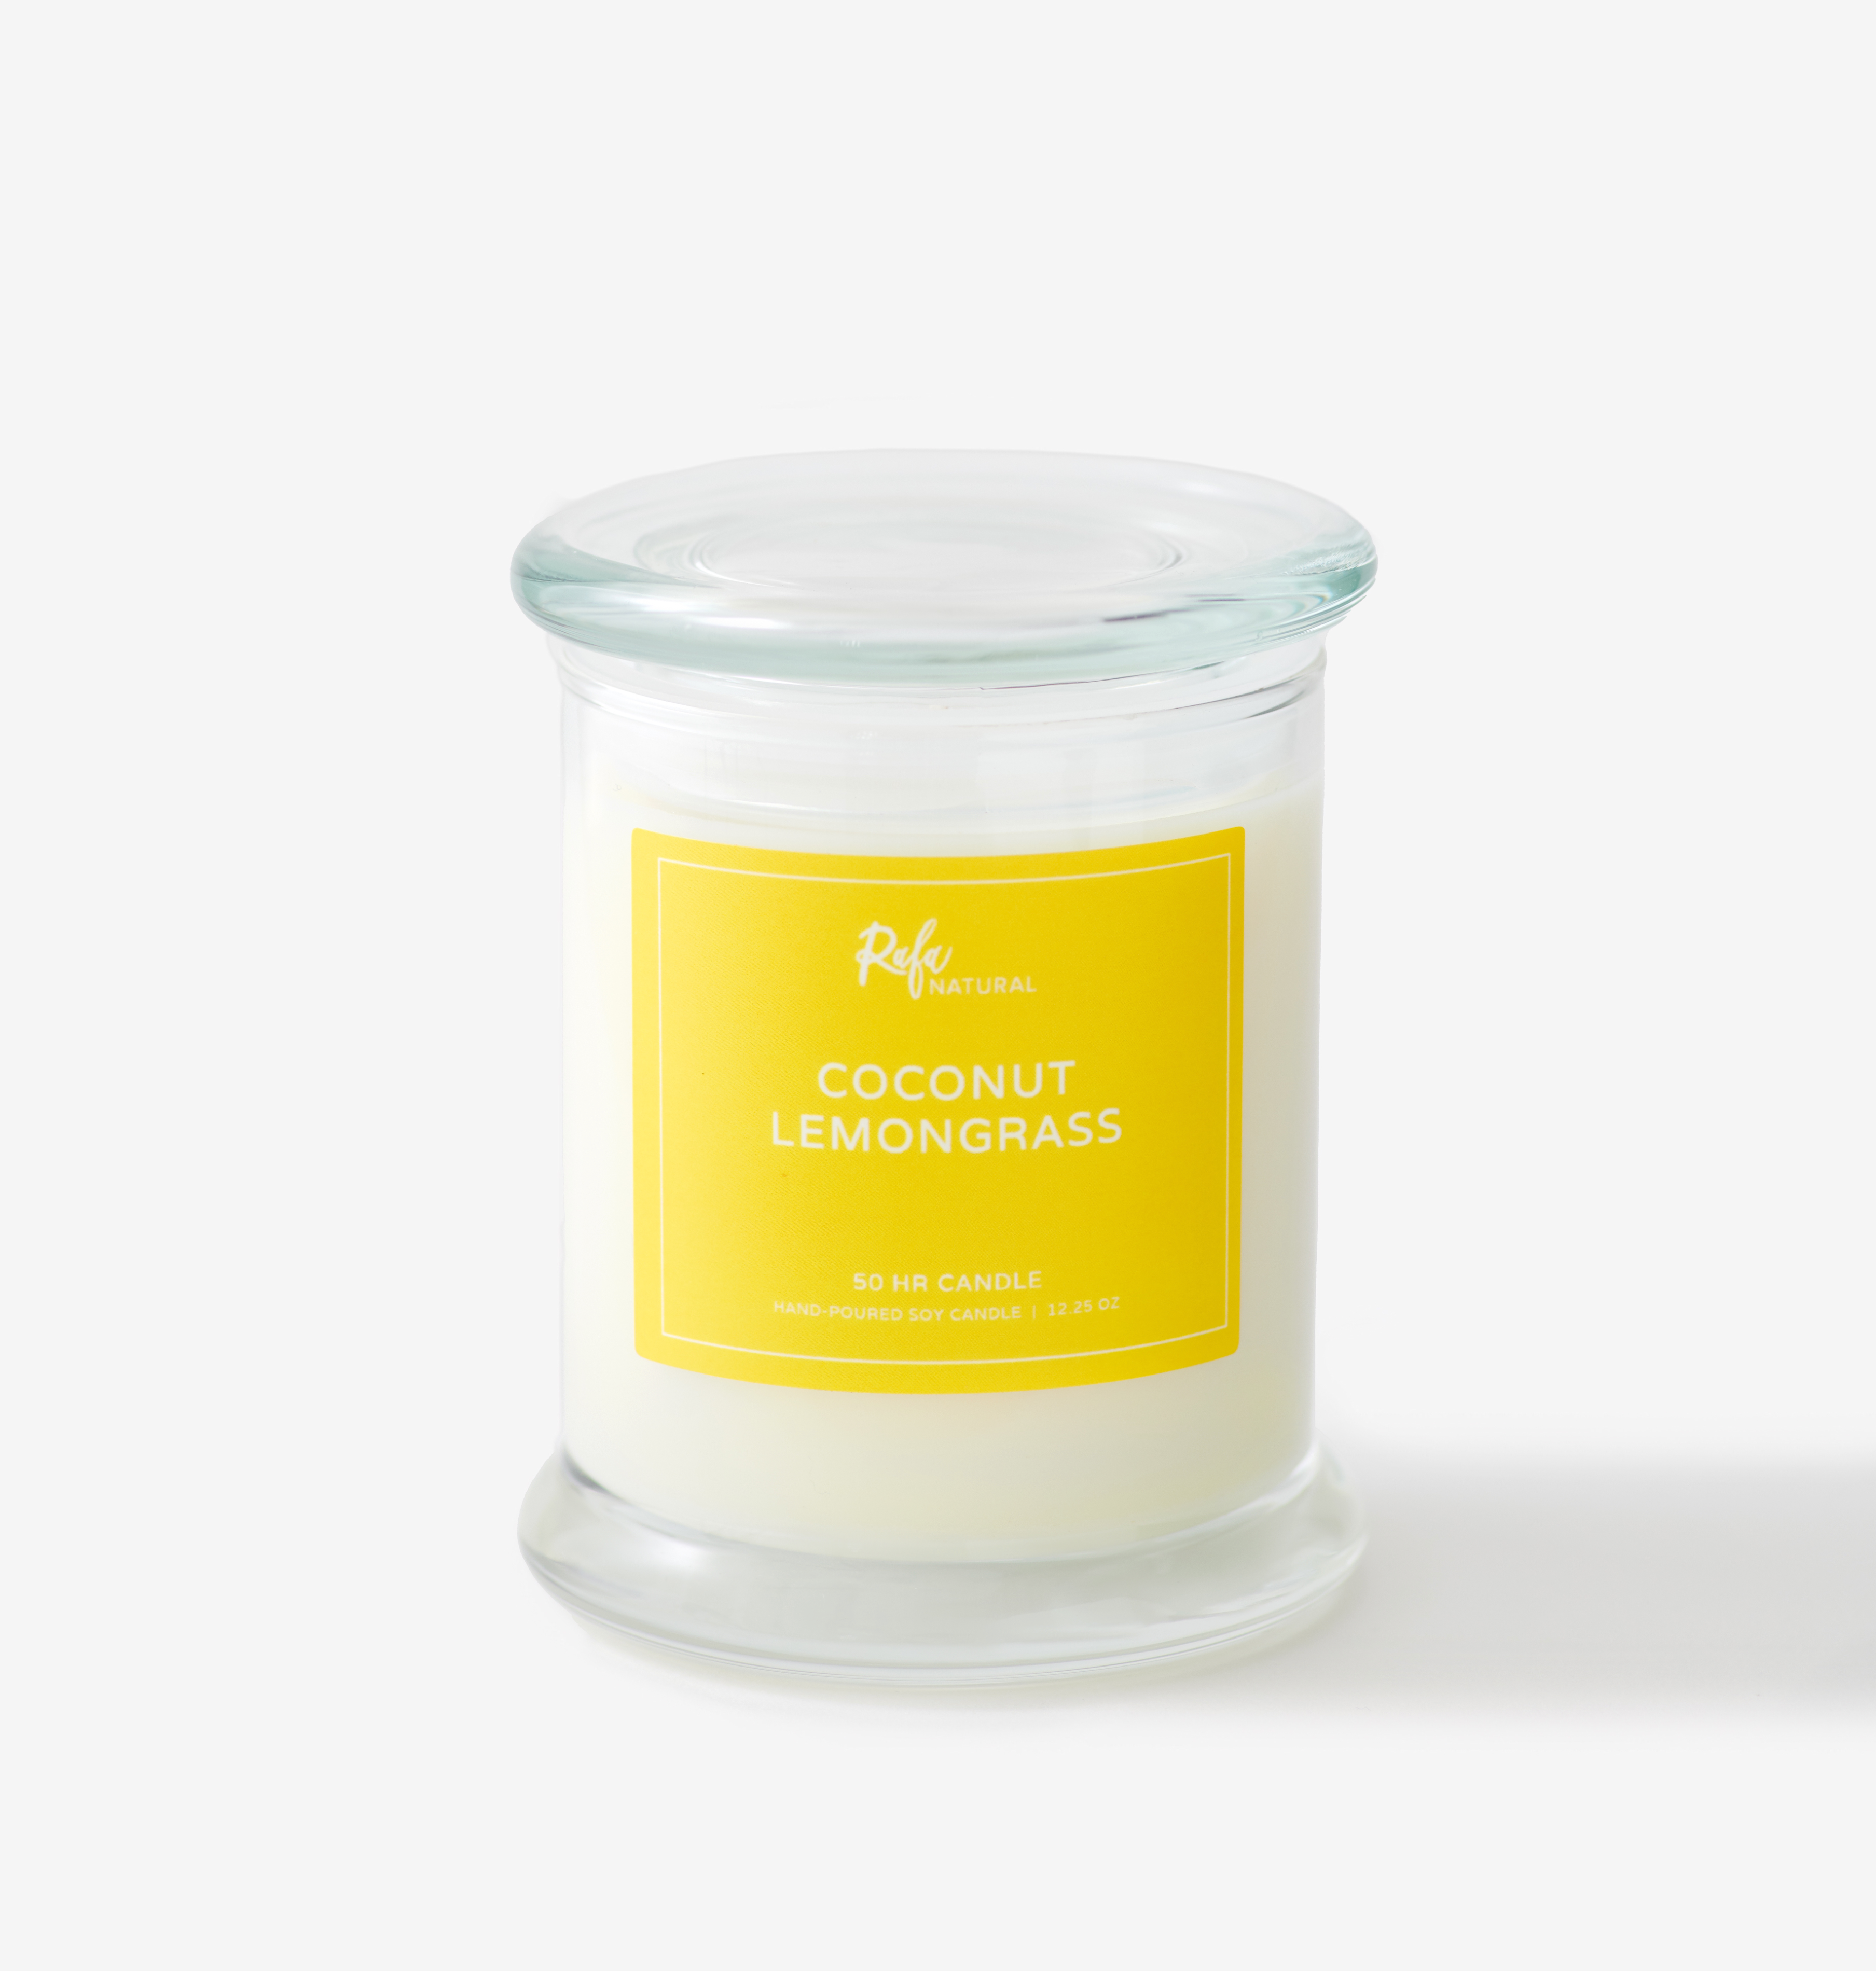 Coconut Lemongrass 50Hr Soy Candle by Rafa Natural